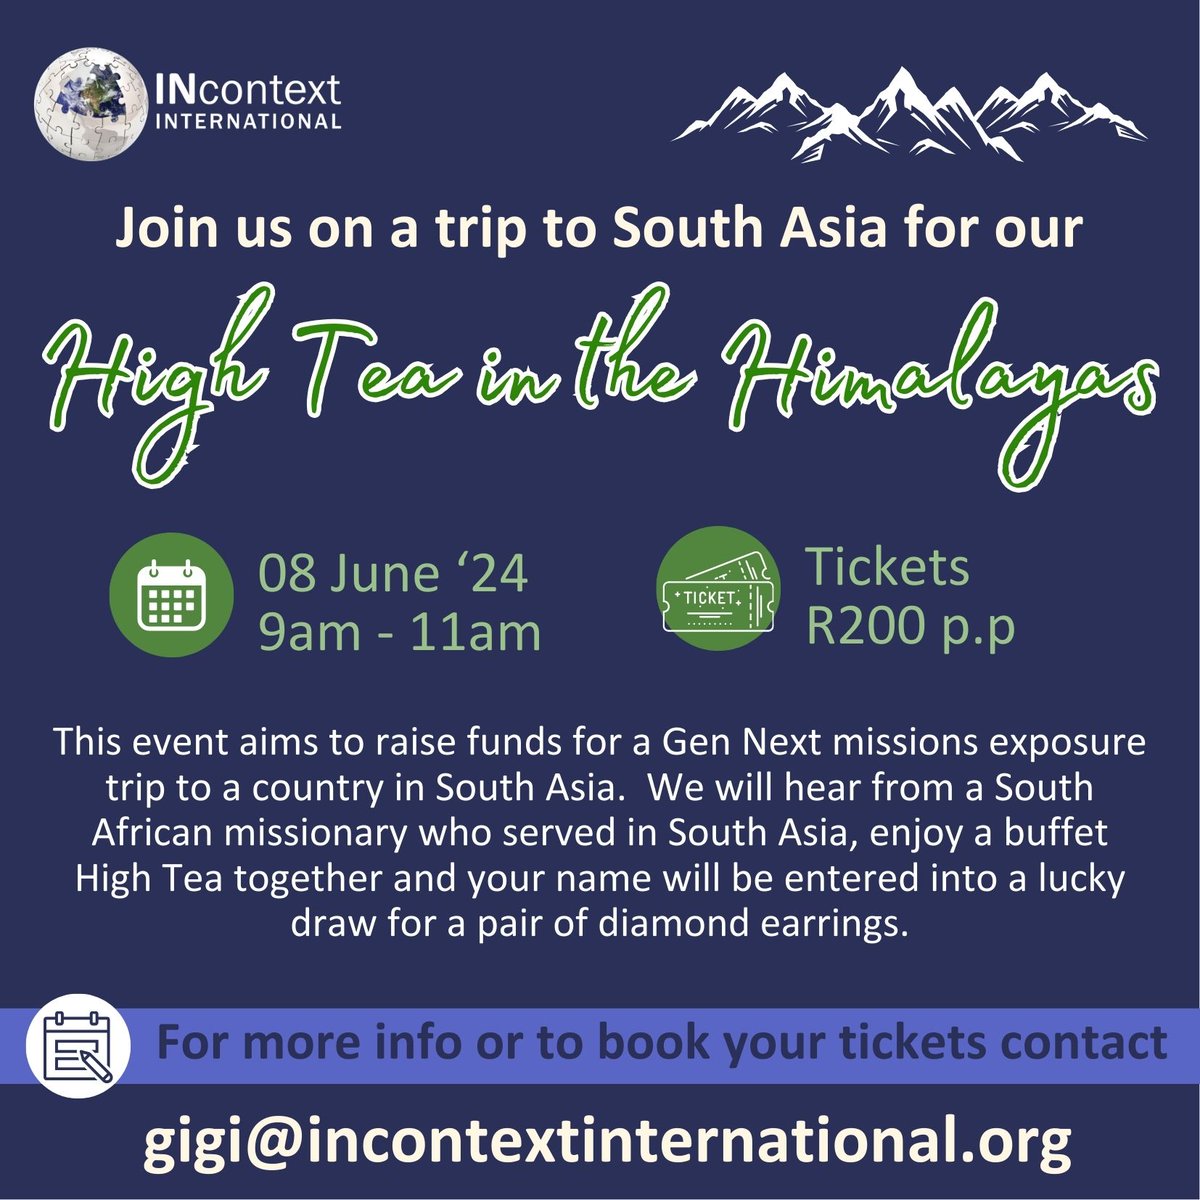 Area: Northern Suburbs of Cape Town Please note that tickets will not be sold at the door. We would love for YOU to join us! ALL ARE WELCOME! For more information or to book your ticket, please email gigi@incontextinternational.org #INcontext #INcontextInternational #events